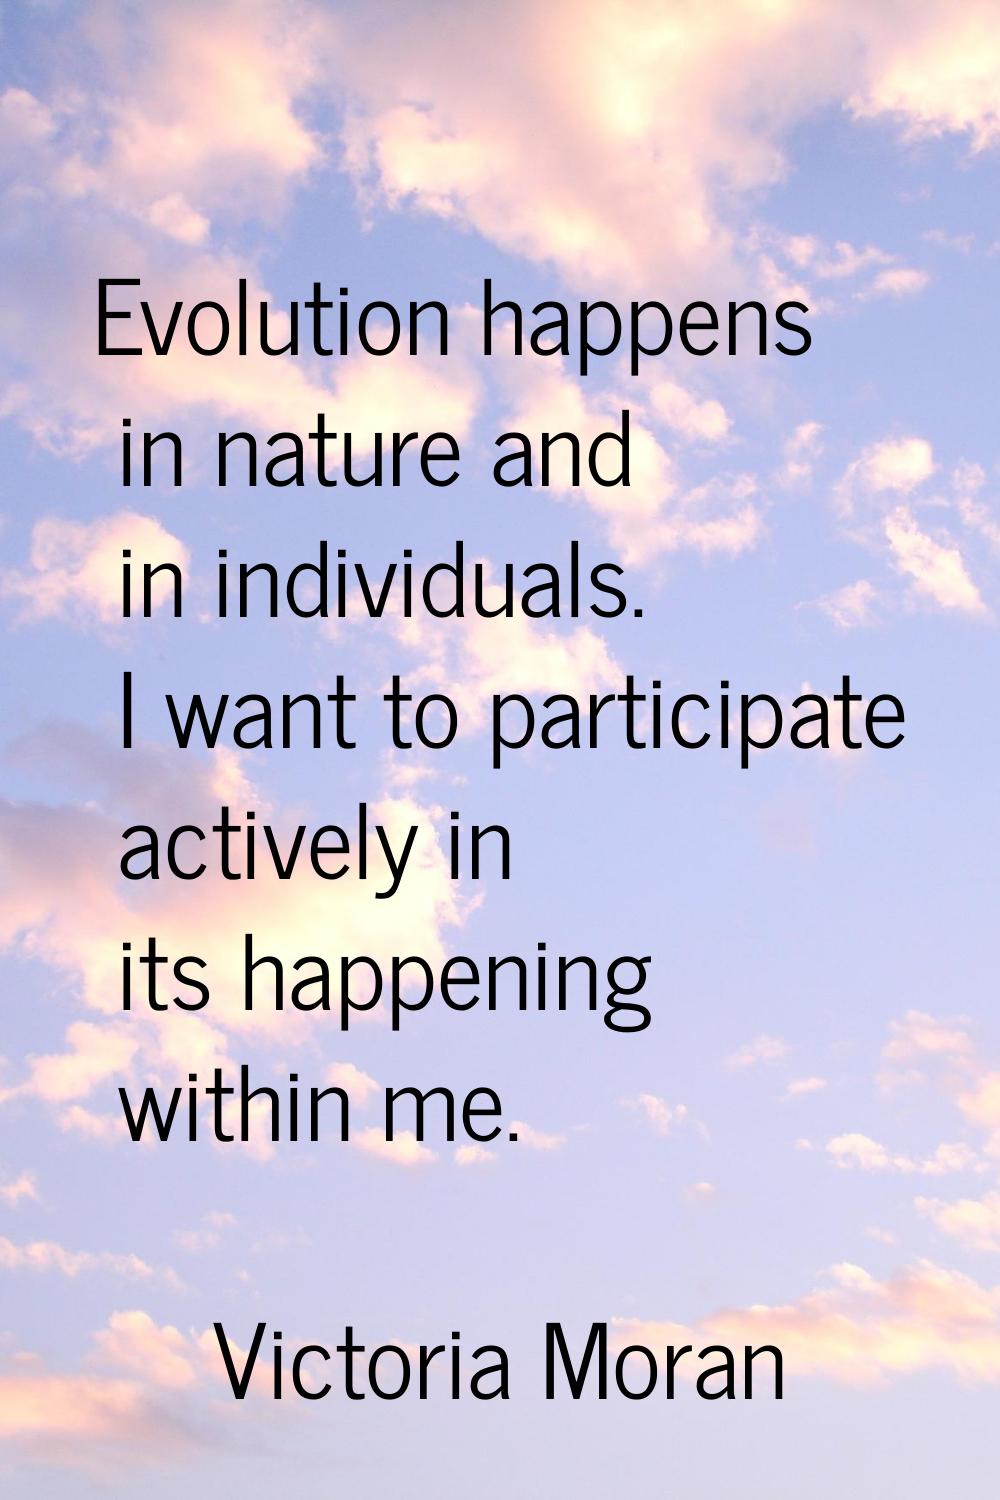 Evolution happens in nature and in individuals. I want to participate actively in its happening wit